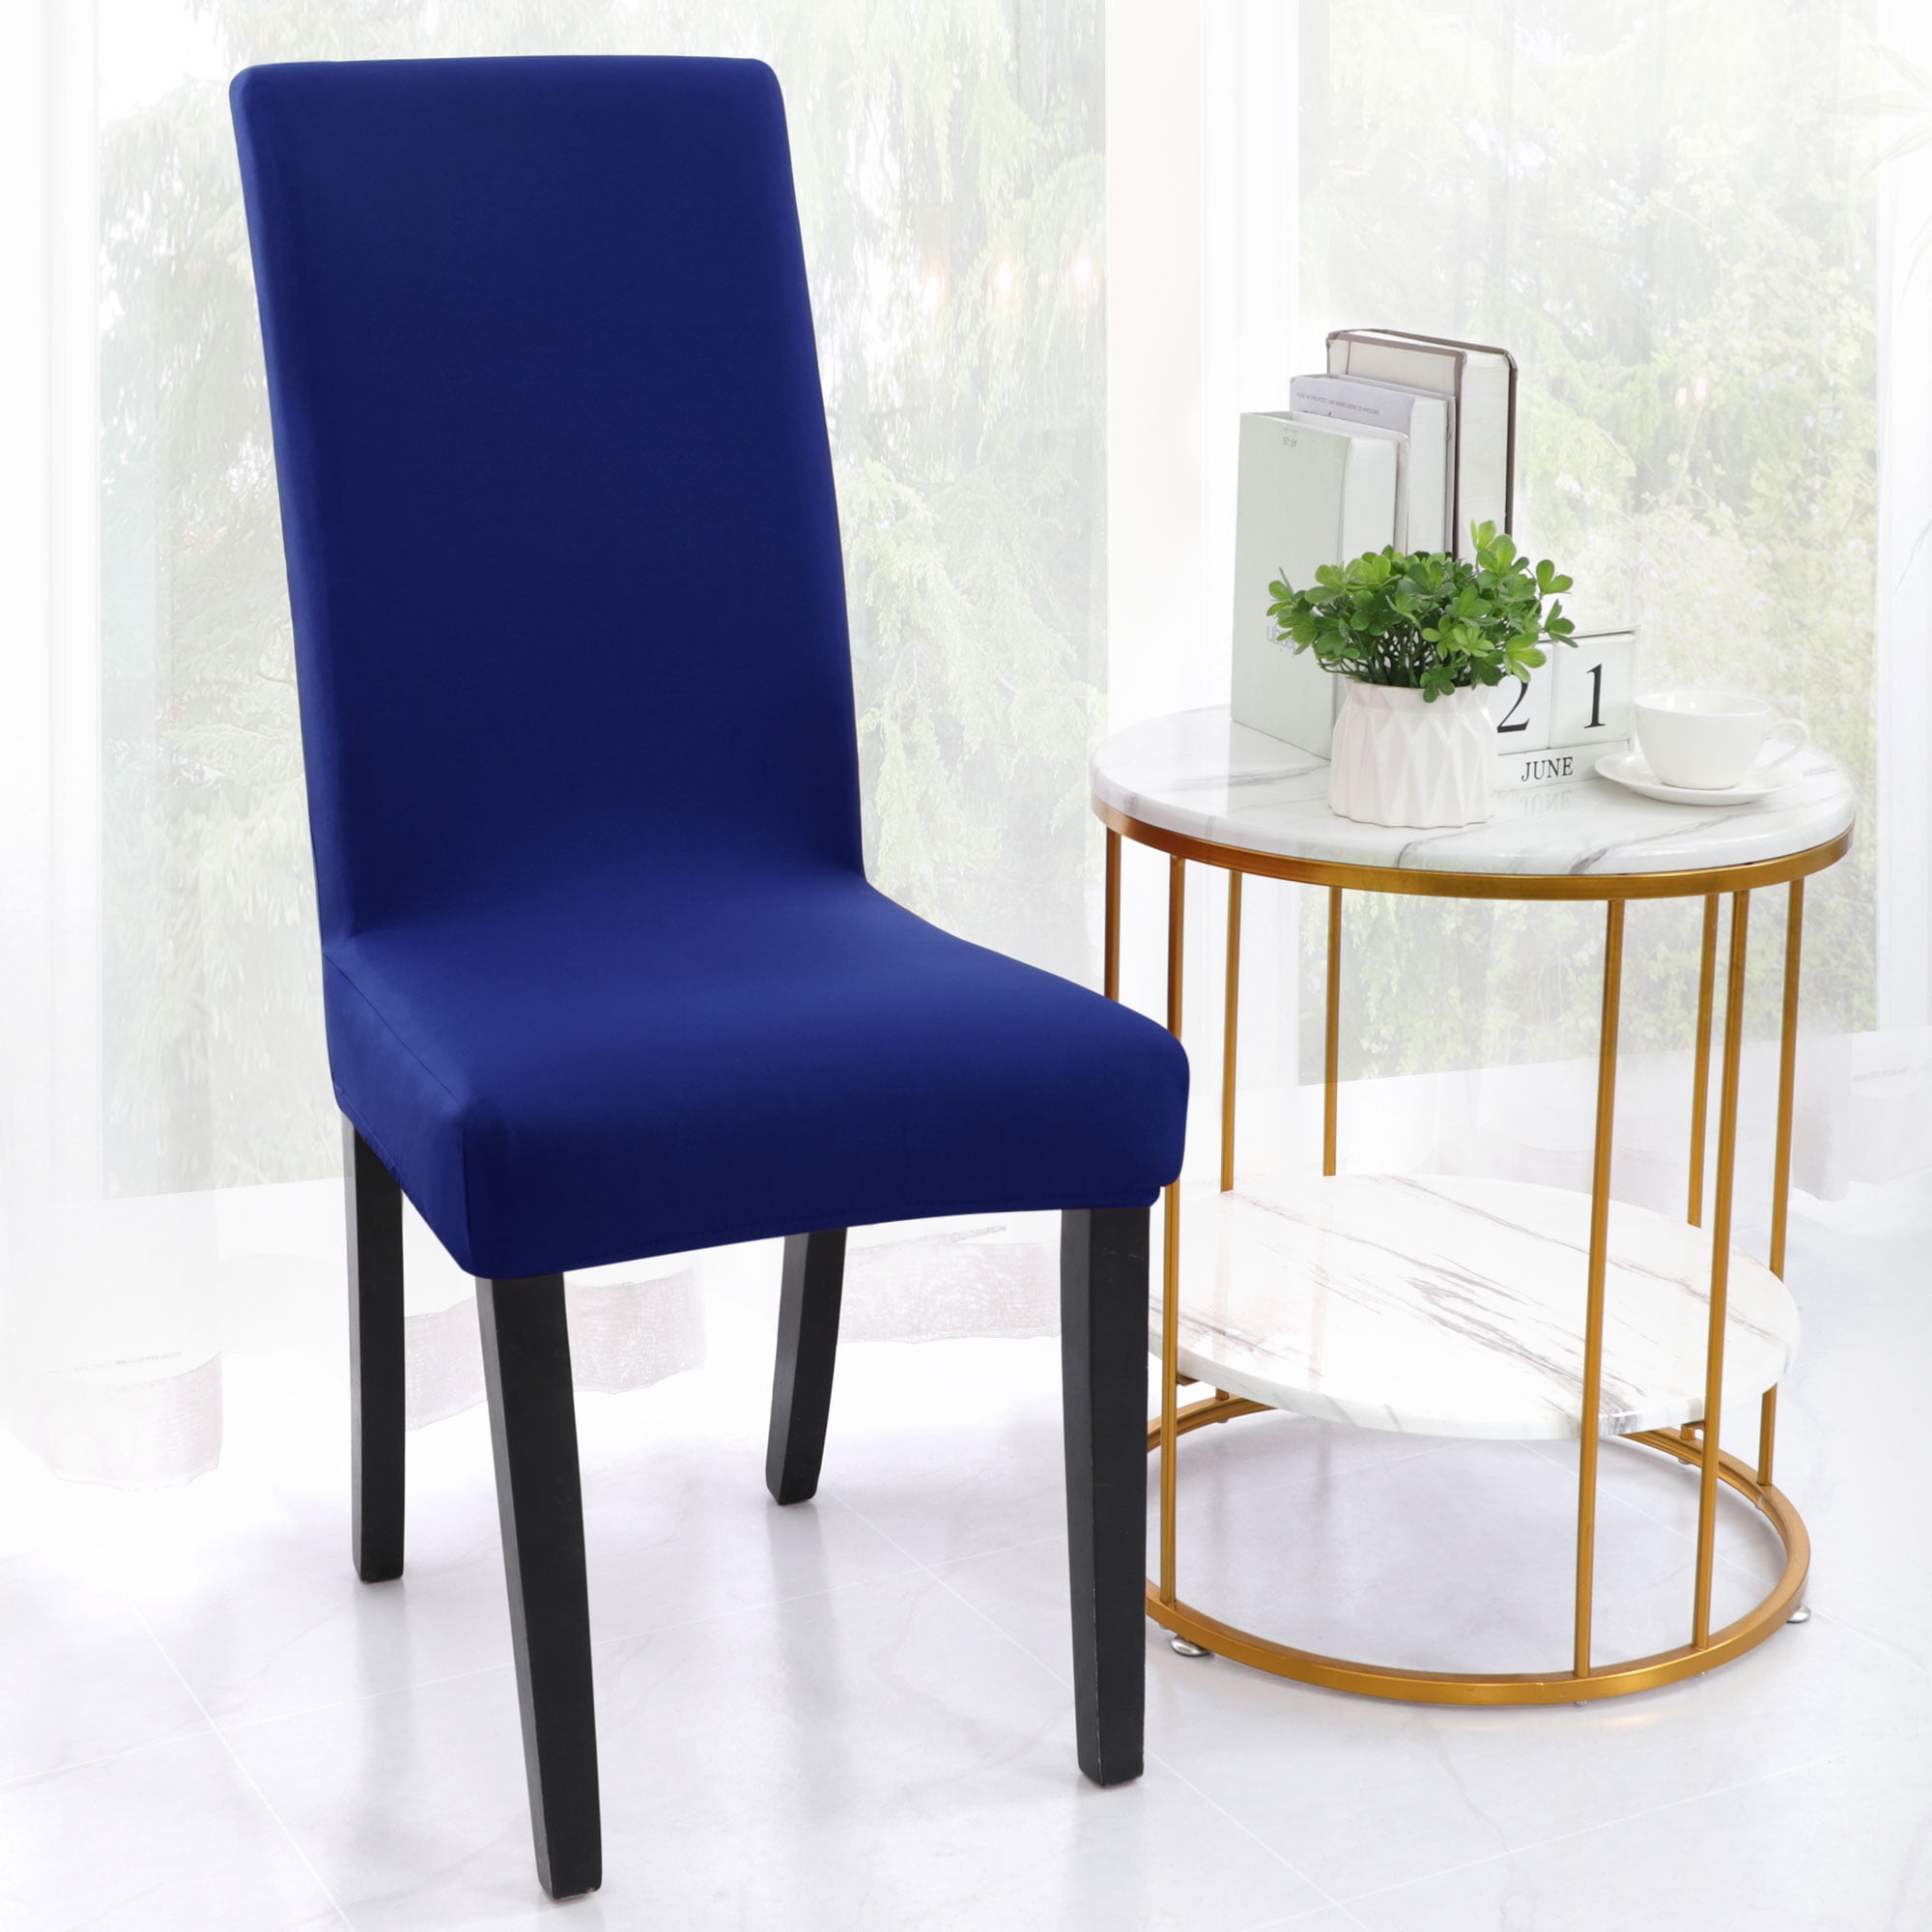 Details about   PU Leather Dining Chair Cover Slipcover Stretch Wedding Home Replace Protector 